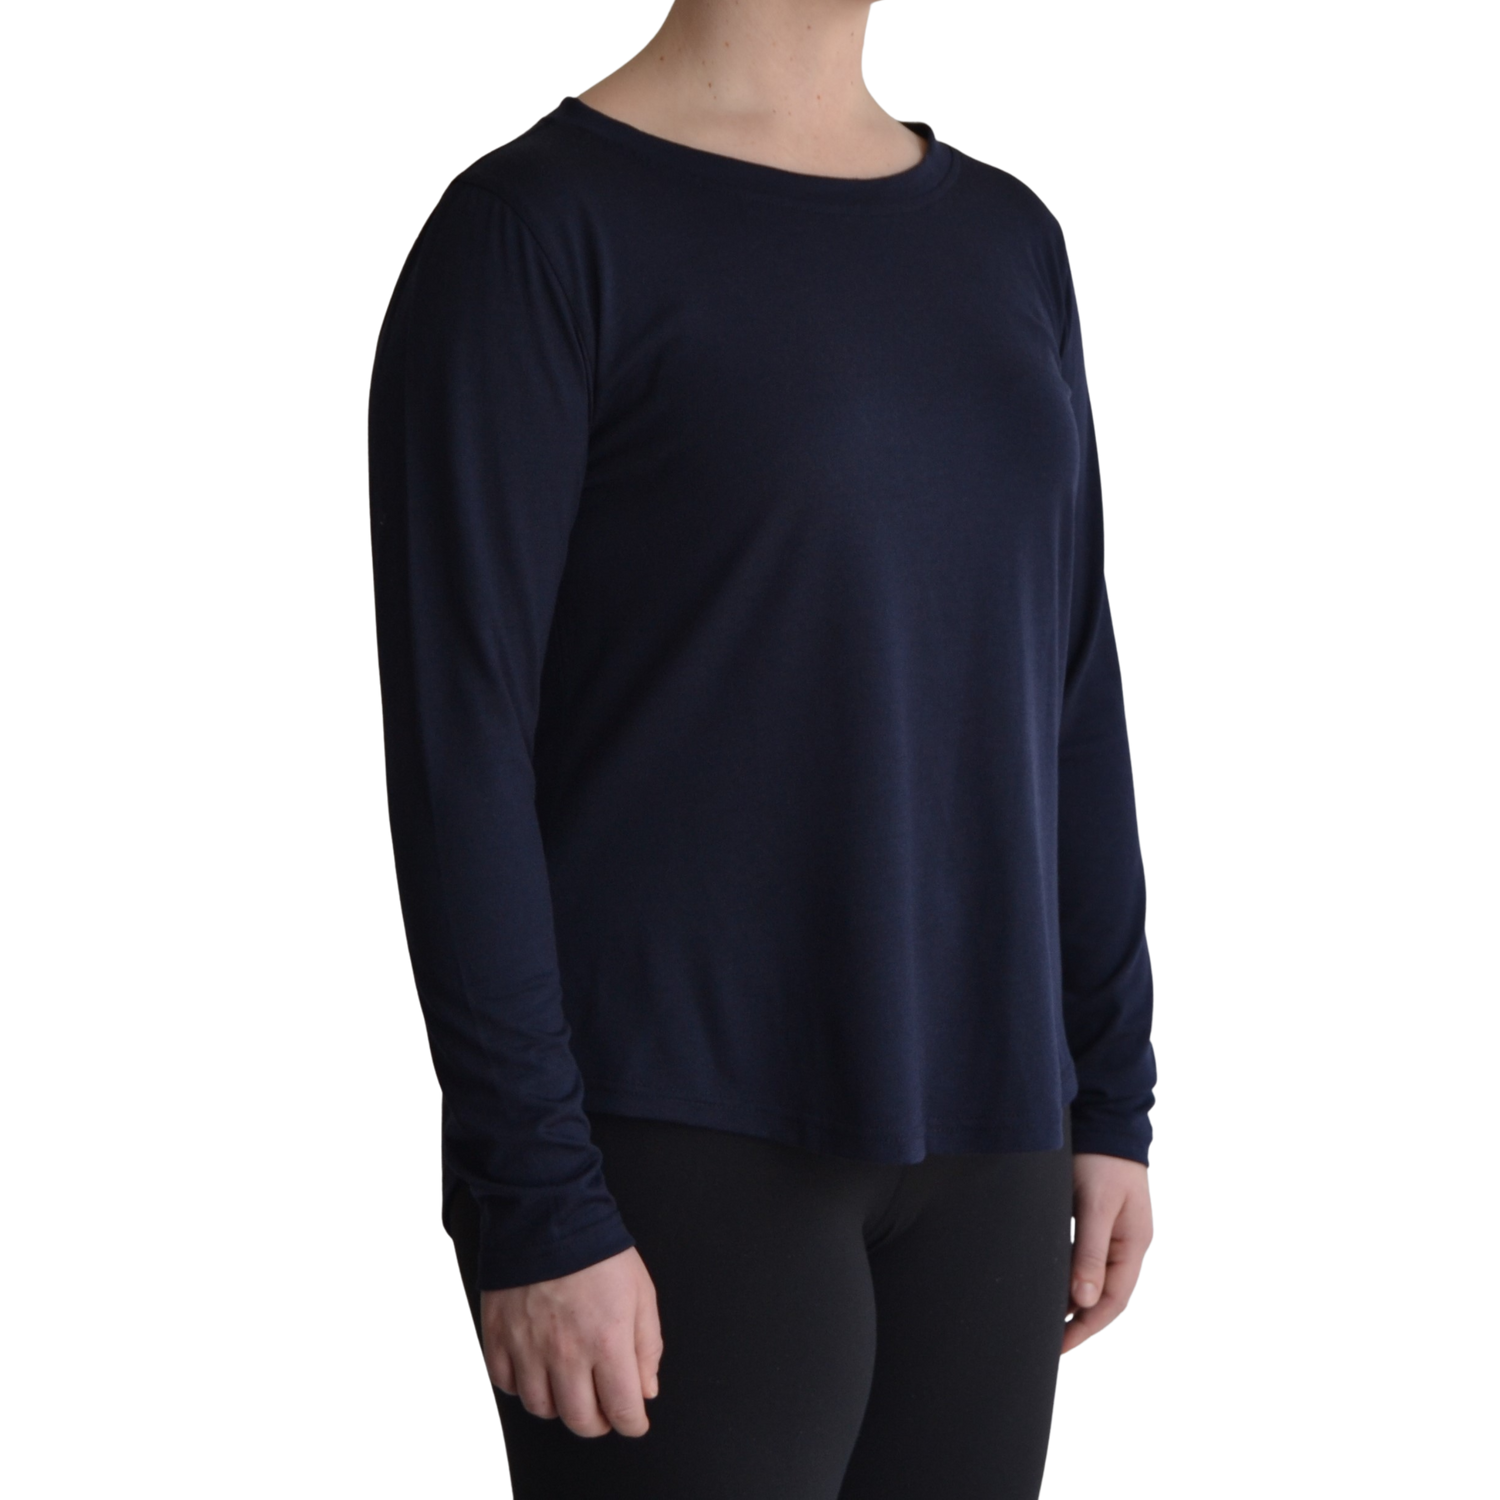 Links long sleeve merino top in navy blue colour. The model is standing on 45 degree angle facing forward